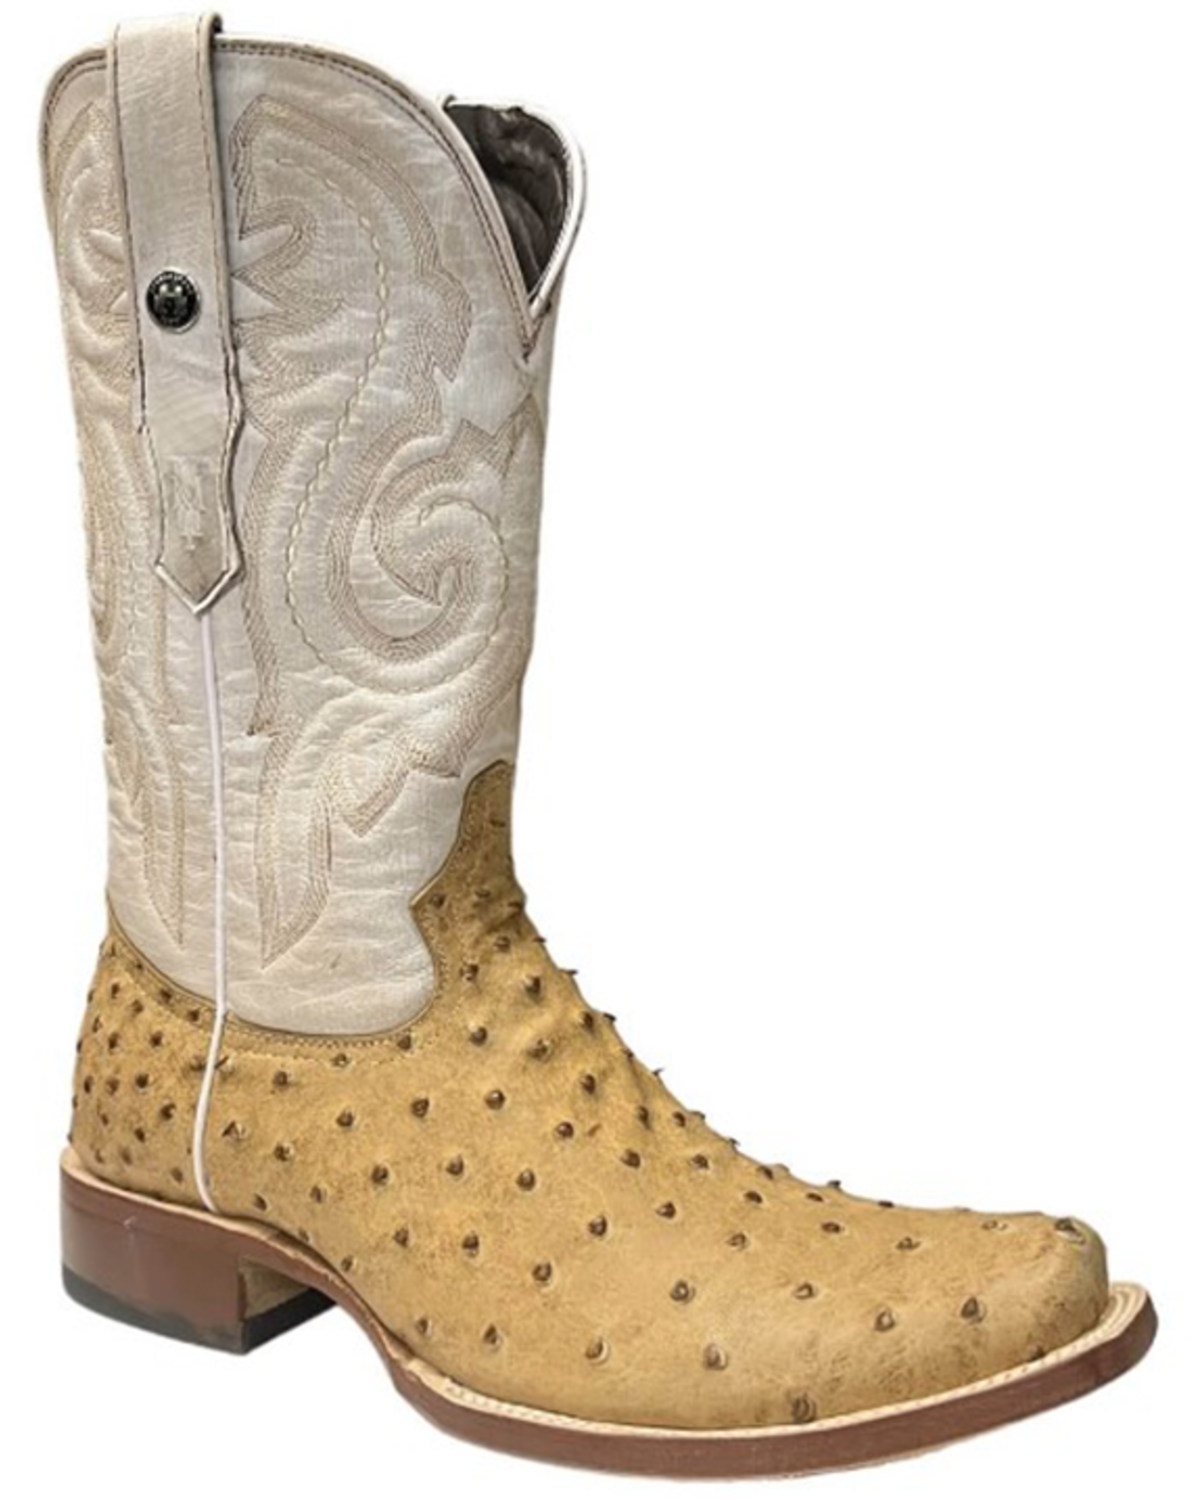 Tanner Mark Men's Ostrich Print Western Boots - Square Toe